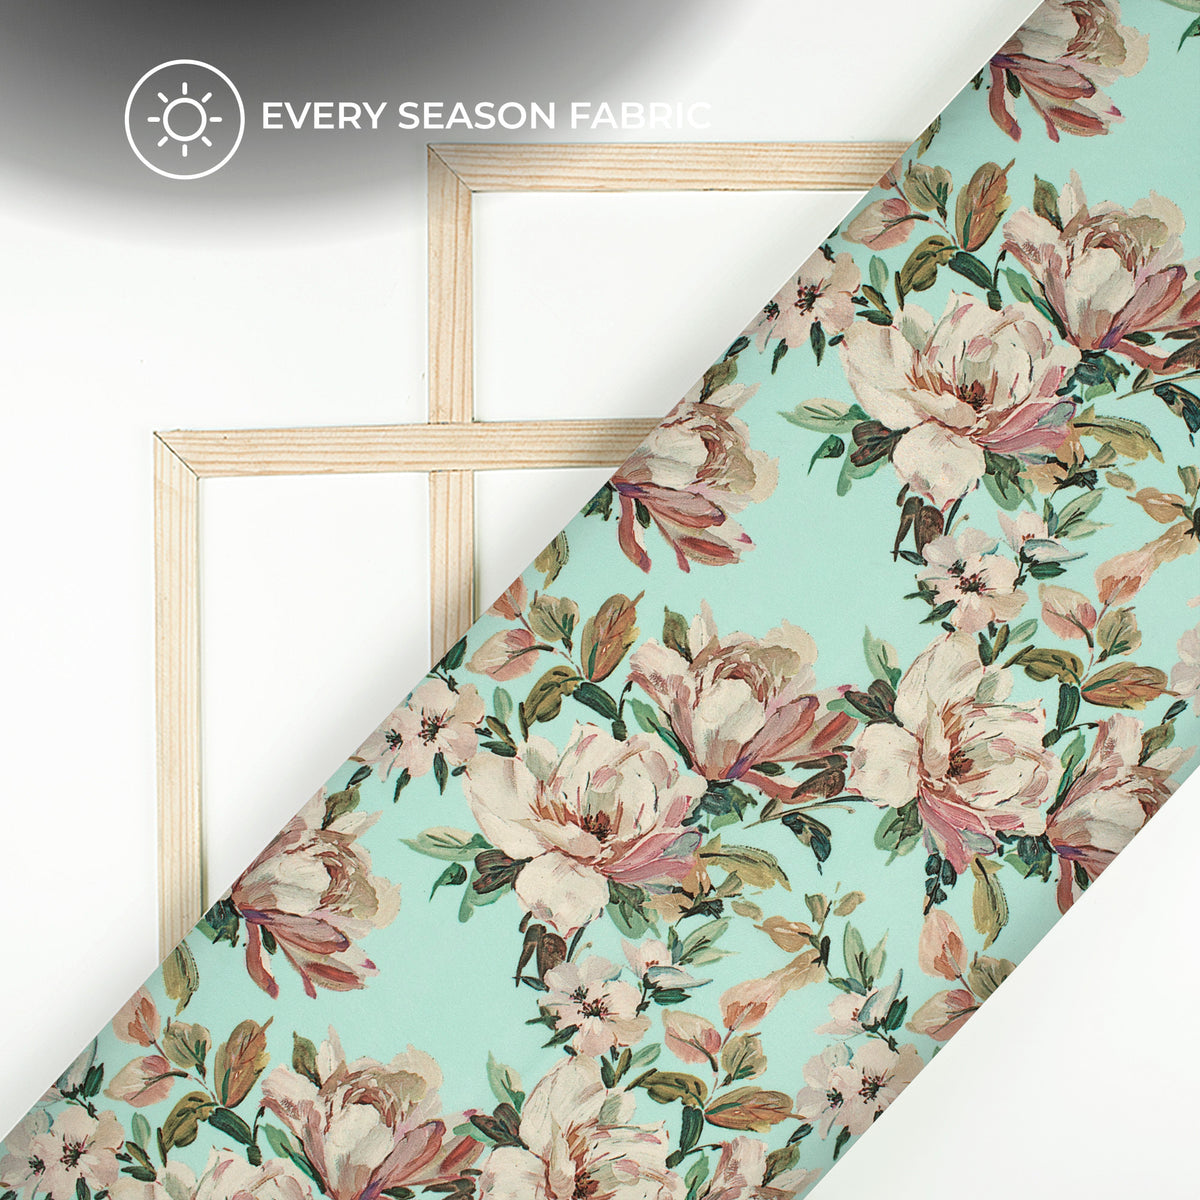 Mint Green And Pink Floral Digital Print BSY Crepe Fabric